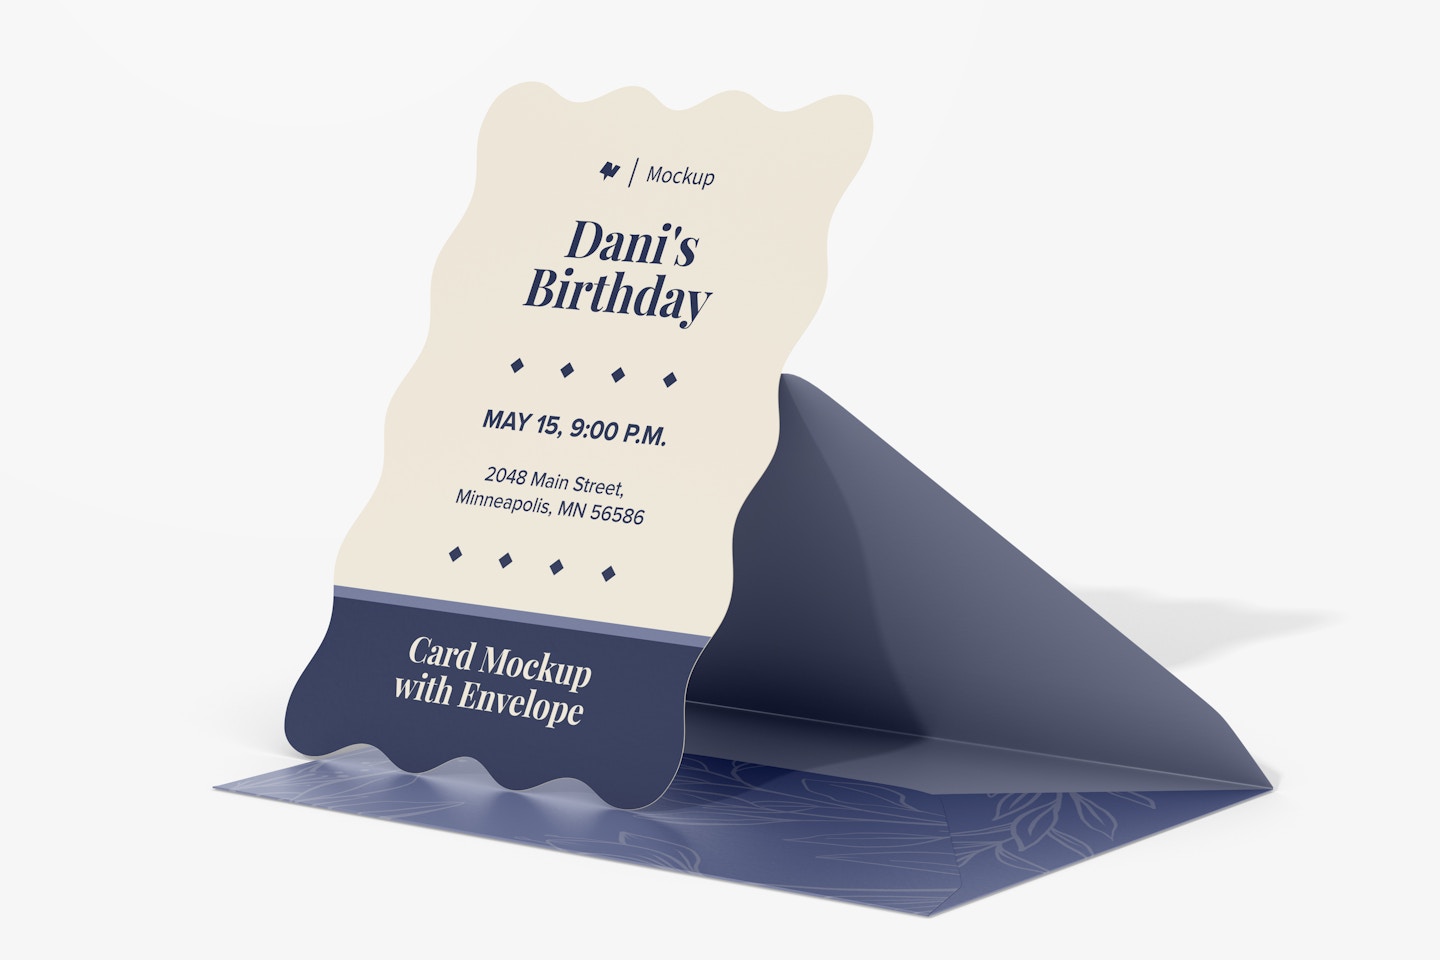 Invitation Card with Envelope Mockup, Leaned